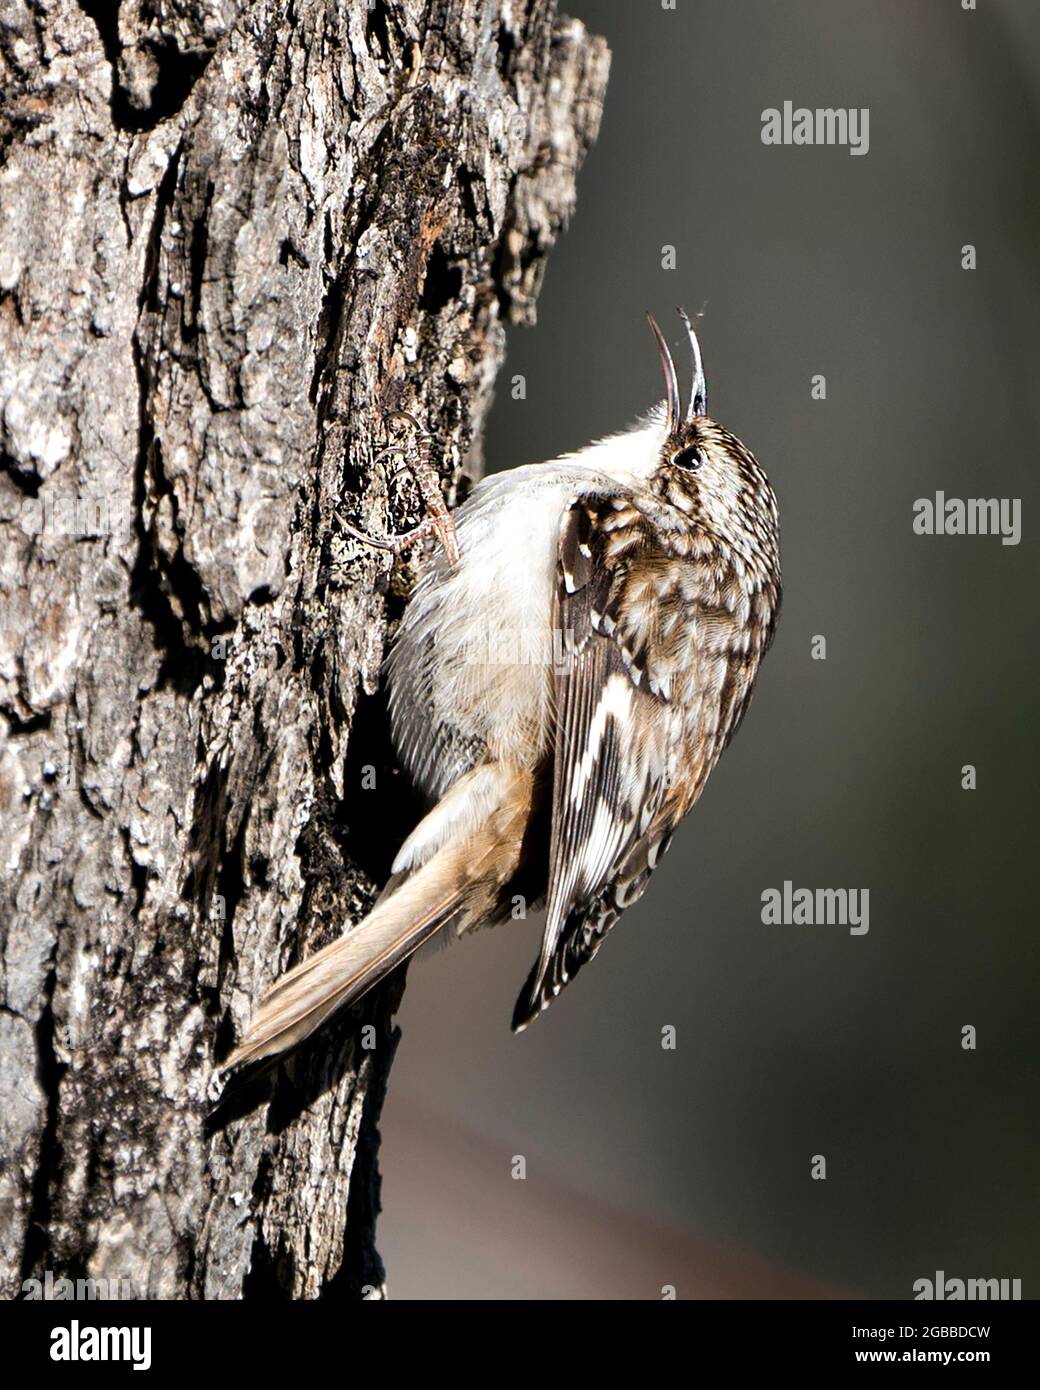 Brown Creeper bird close-up on a tree trunk looking for insect in its environment and habitat and displaying brown camouflage feathers, curved claws. Stock Photo